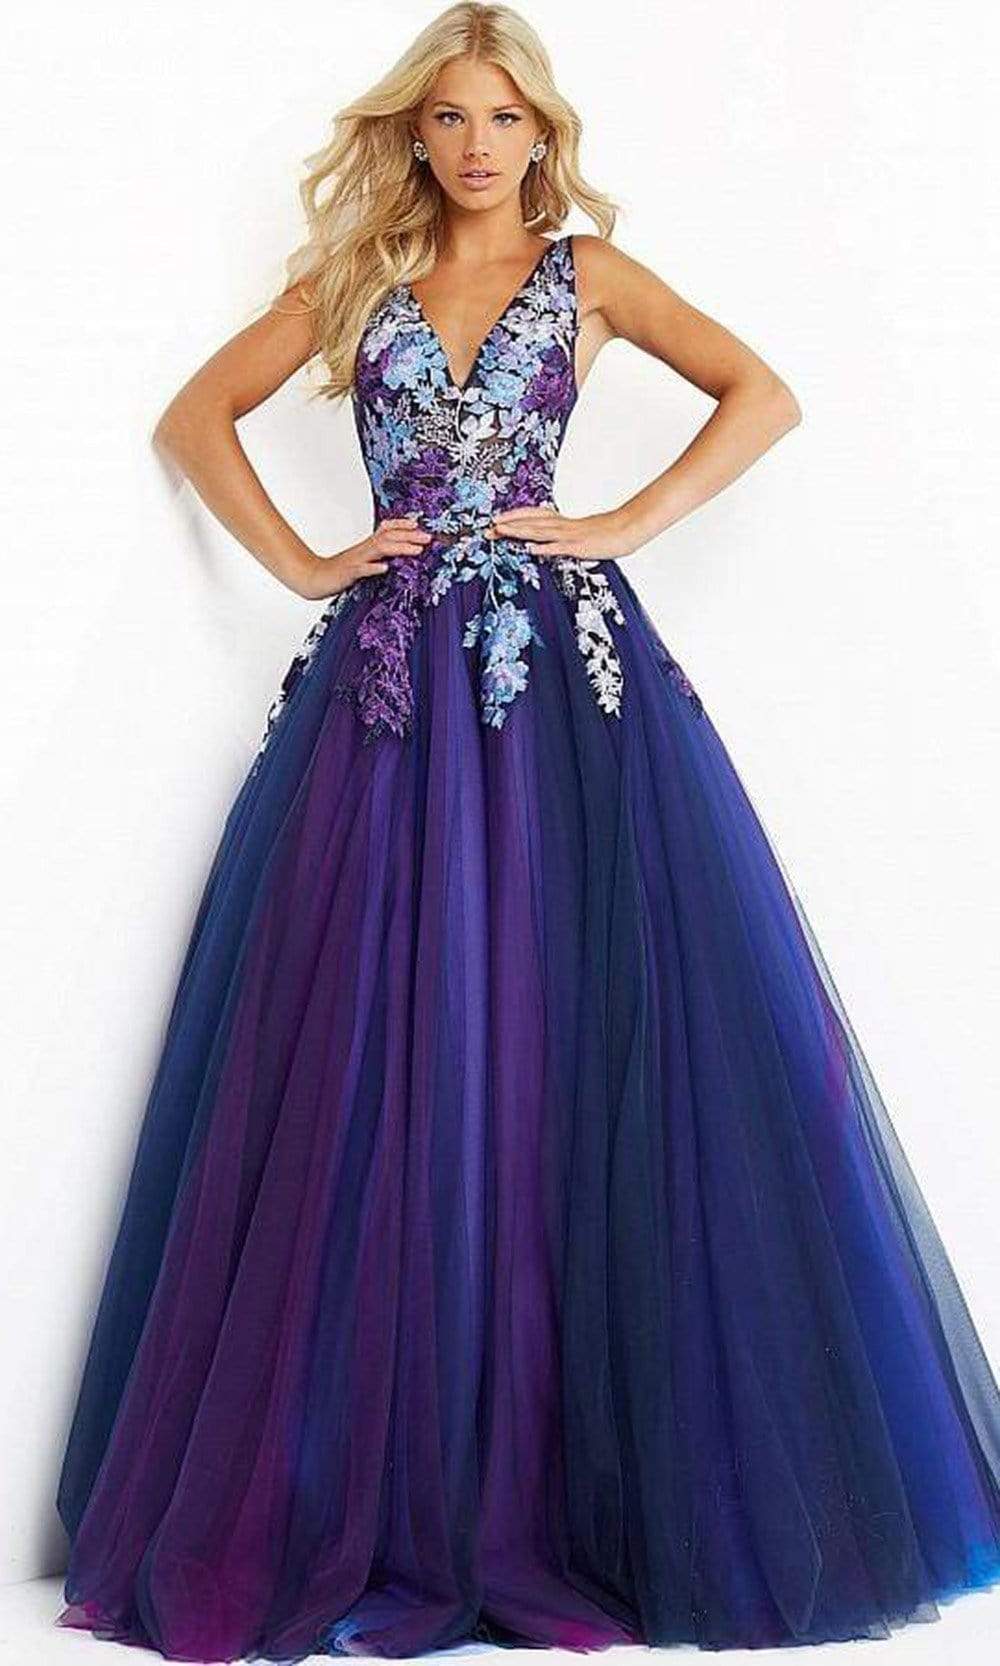 Jovani - 06807 Gradient Floral Embroidered A-line Gown
